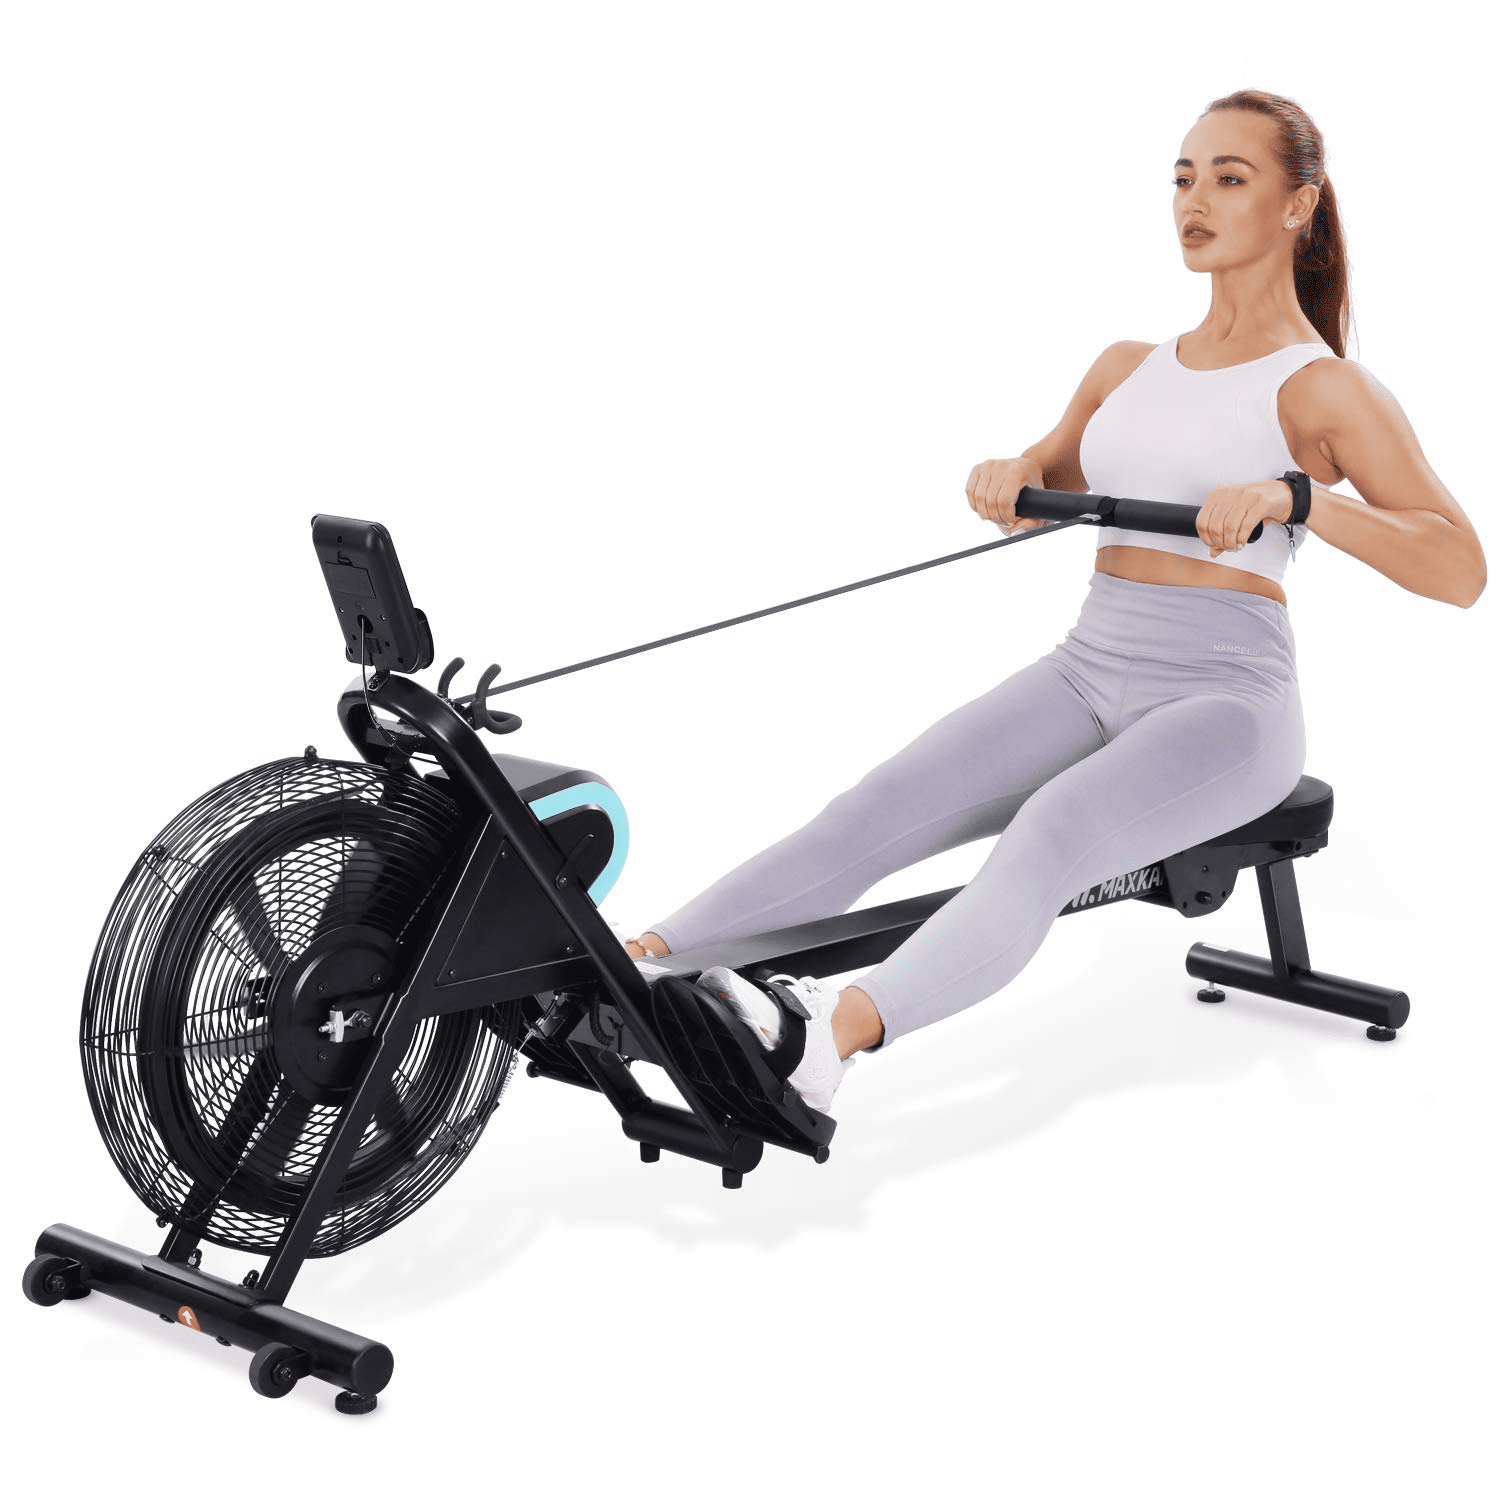 Fitness Gym Cardio Workout Air Resistance System Adjustable on 8 levels Hop-Sport Air Rowing Machine HS-065AR Folding 